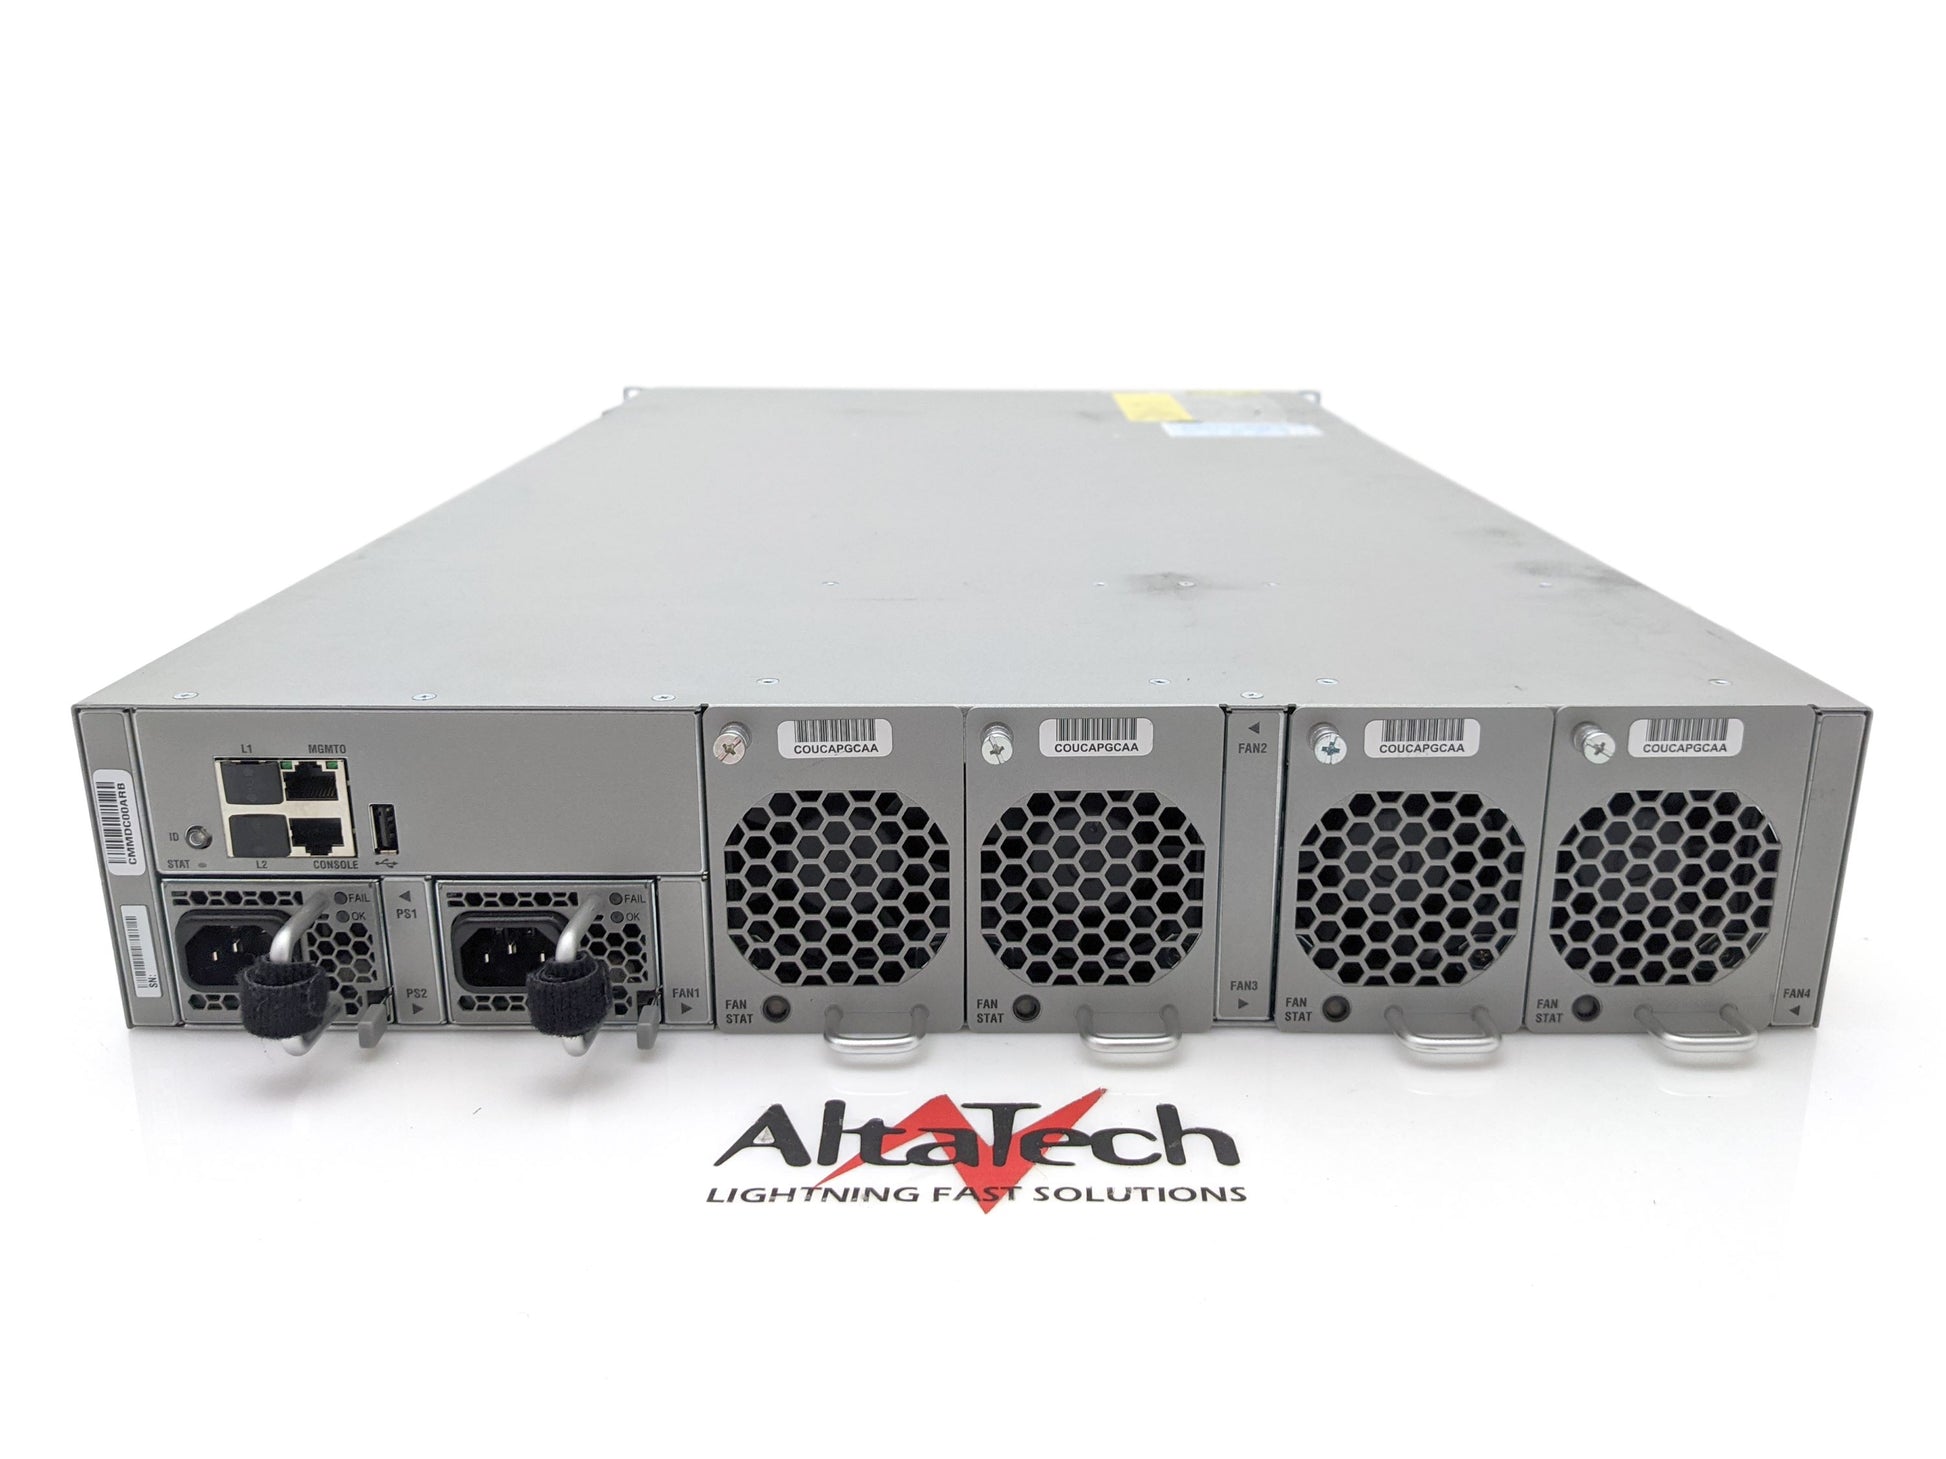 Cisco N5K-C5596UP-FA Nexus 5596UP 48-Port 10Gbps SFP+ (Ethernet, FC, FCoE) Switch, Used